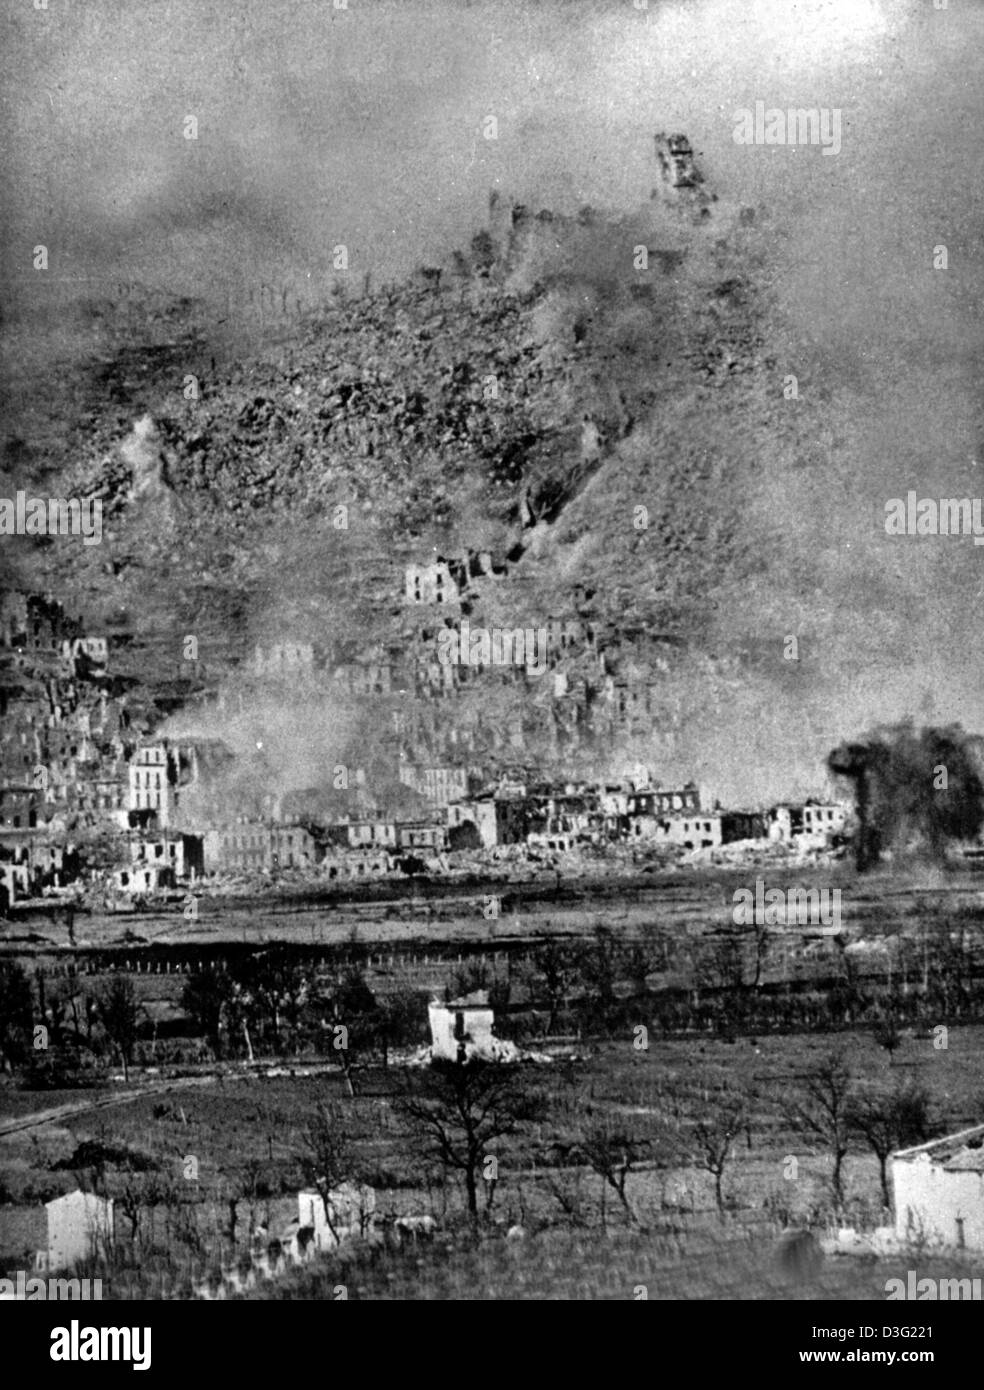 (dpa files) - A view over the expanse of ruins of Monte Cassino, Italy, 15 February 1944. That day, the Benedictine monastery dating from 529, was completely destroyed in an airstrike by the Allied forces although there were no German Wehrmacht soldiers near Monte Cassino. Allied forces had attacked the monastery with 229 warplanes. By miracle none of the monks was killed. The mona Stock Photo